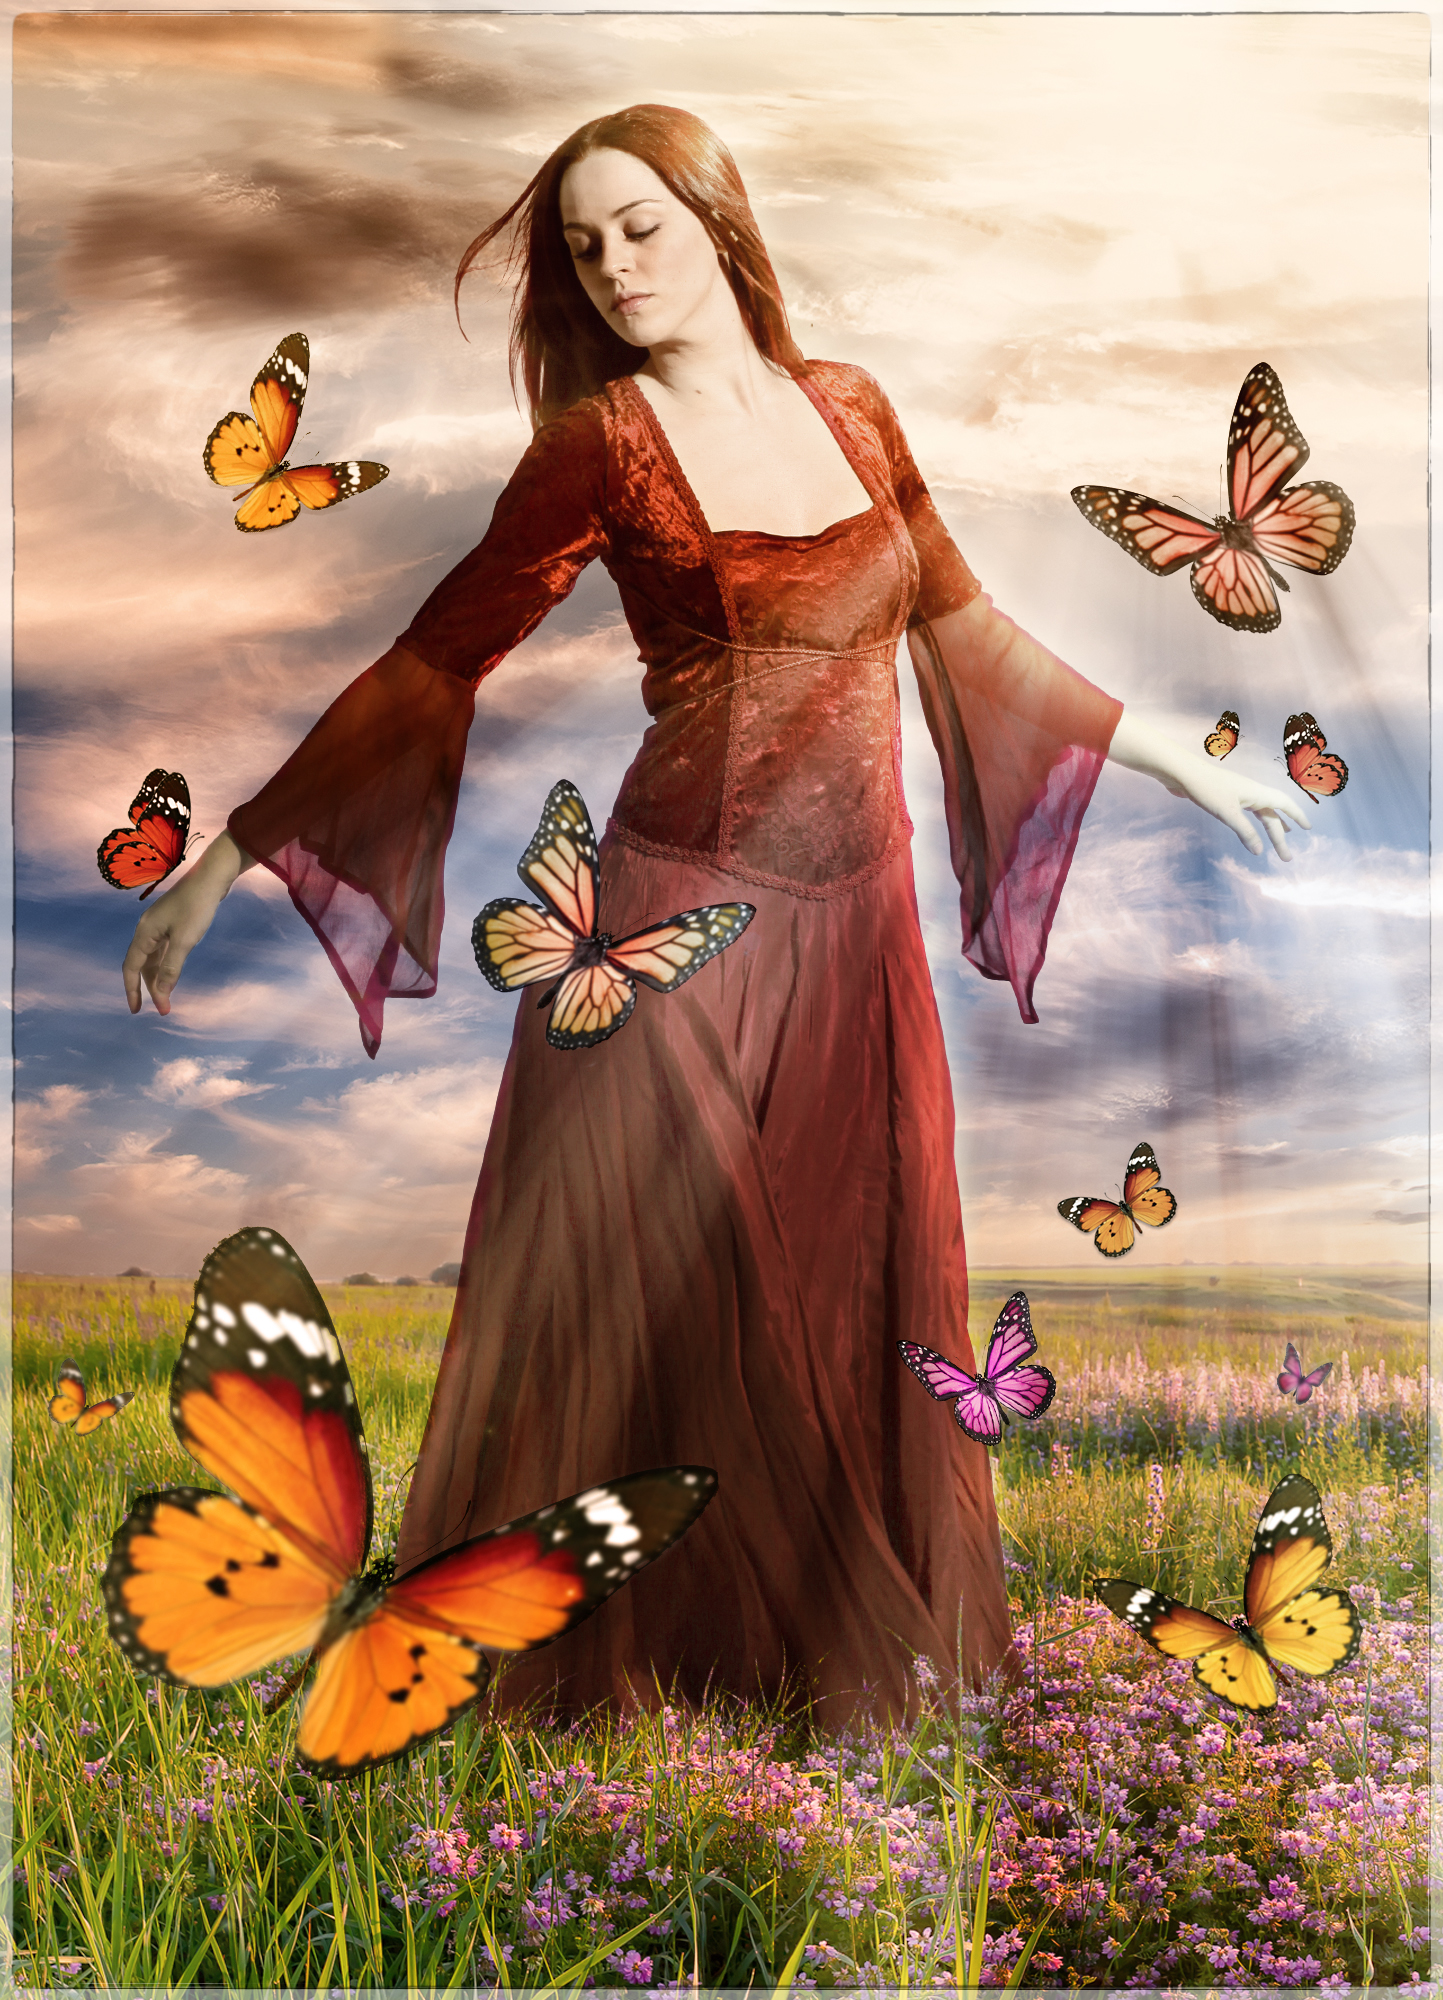 Butterfly Girl - (#Photoshop CC) - By Maxy71 by Maxy71 on DeviantArt